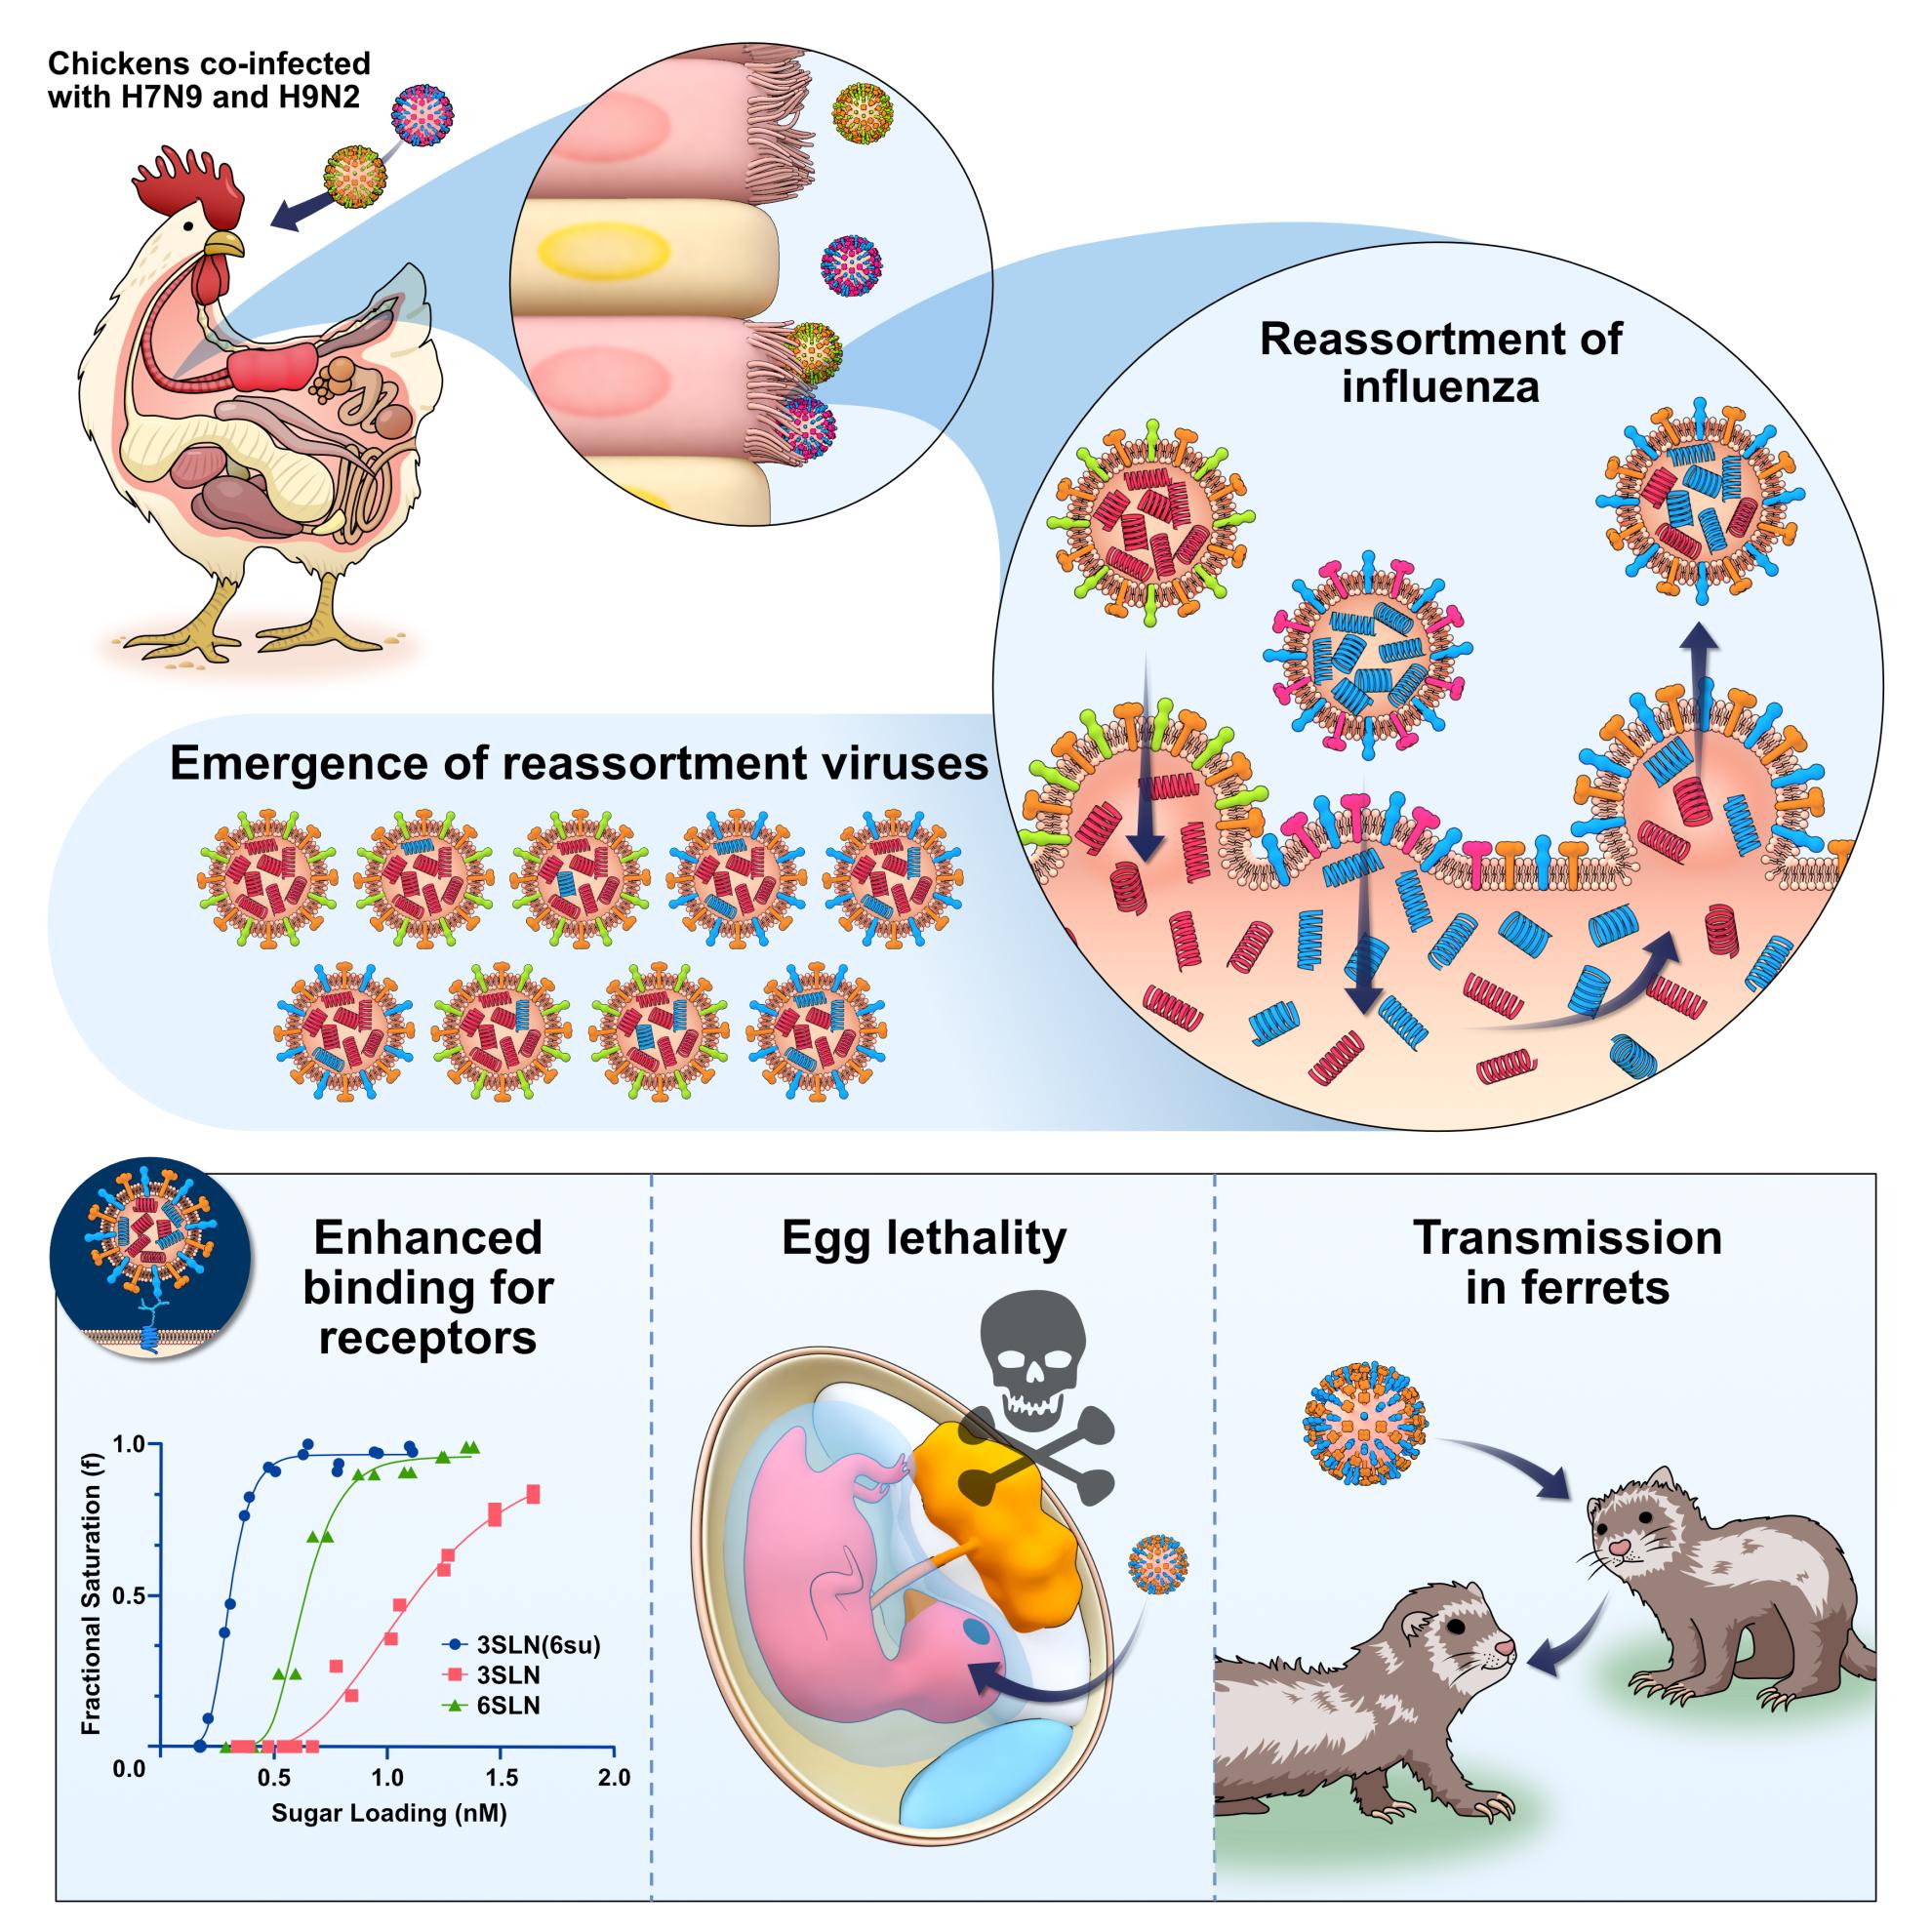 This image is an illustration of the work carried out by Pirbright scientists. The image shows that when a chicken is infected with H7N9 and H9N2 strains of avian influenza, these viruses can reassort (swap genetic information) to create a strain that can bind better to cell, cause death in chicken embryos and spread disease in ferrets